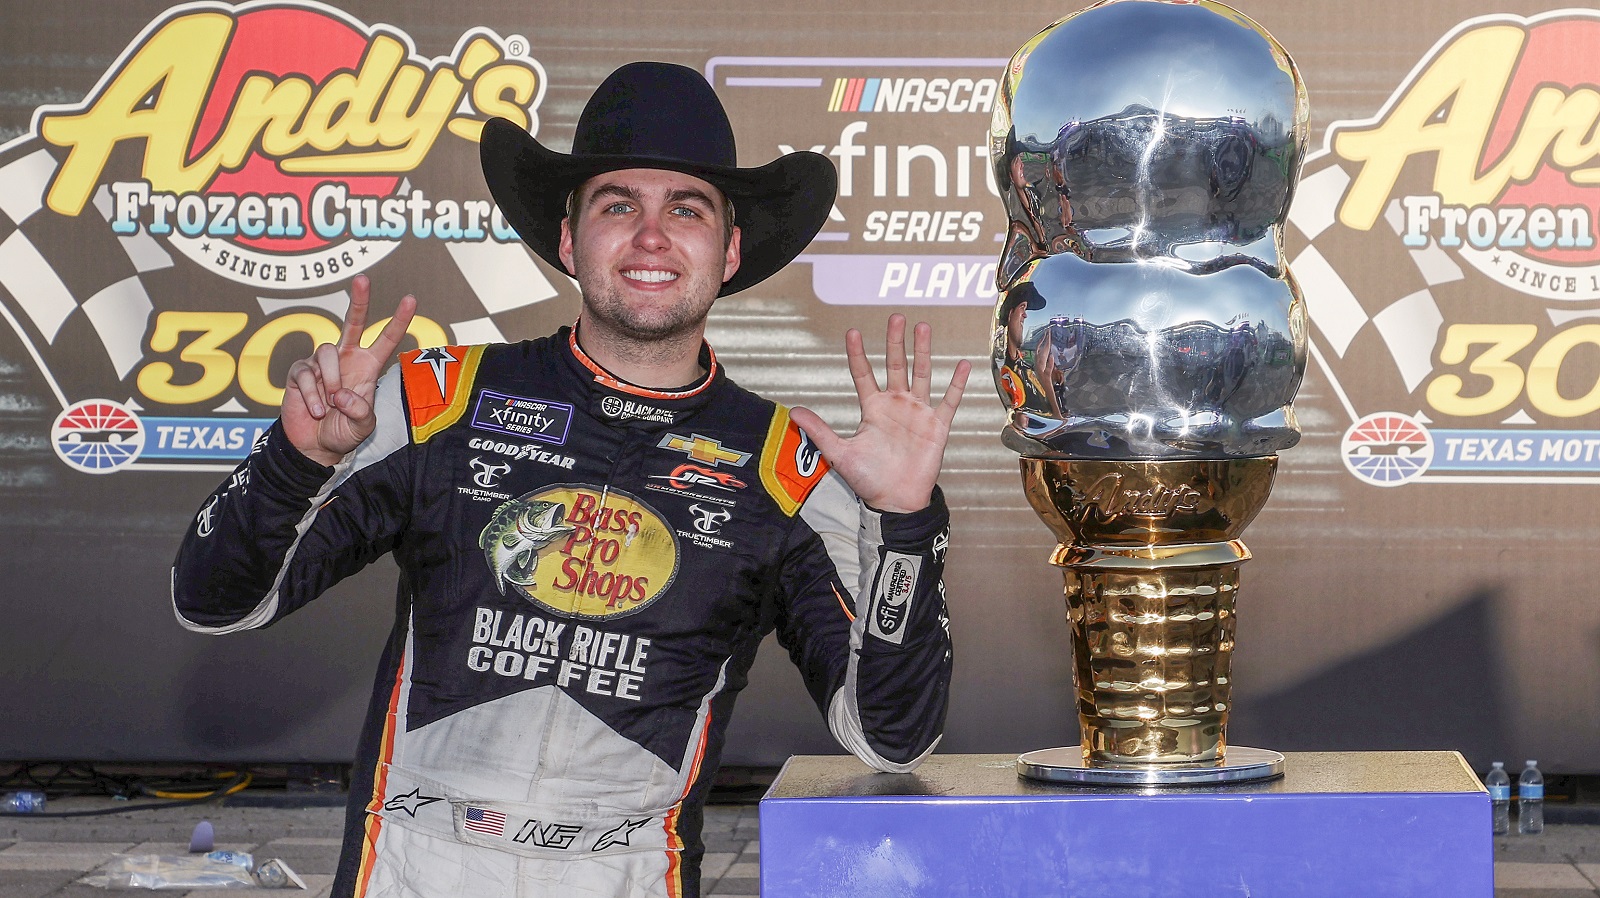 Noah Gragson celebrates winning the NASCAR Xfinity Series Andy's Frozen Custard 300 at Texas Motor Speedway on Sept. 24, 2022. | James Gilbert/Getty Images